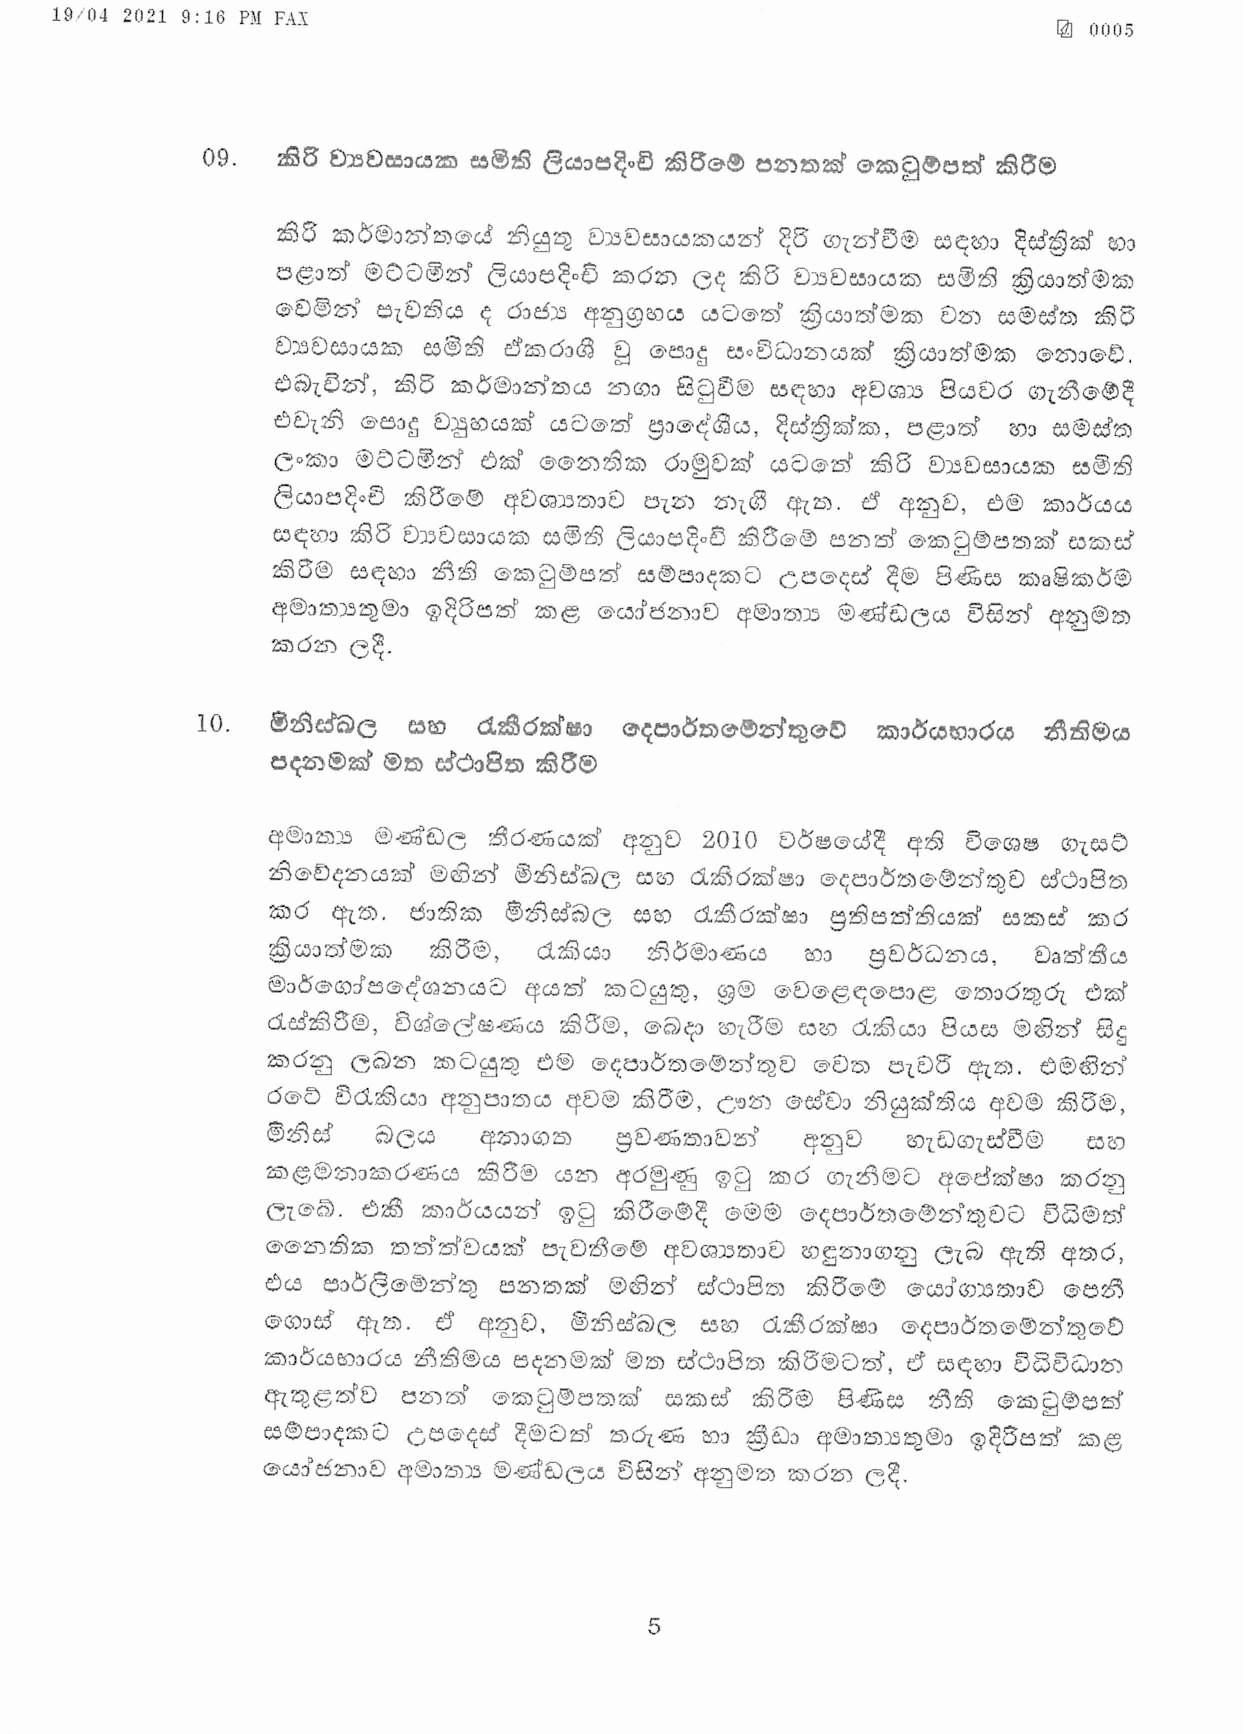 Cabinet Decision on 19.04.2021 Sinhala page 005